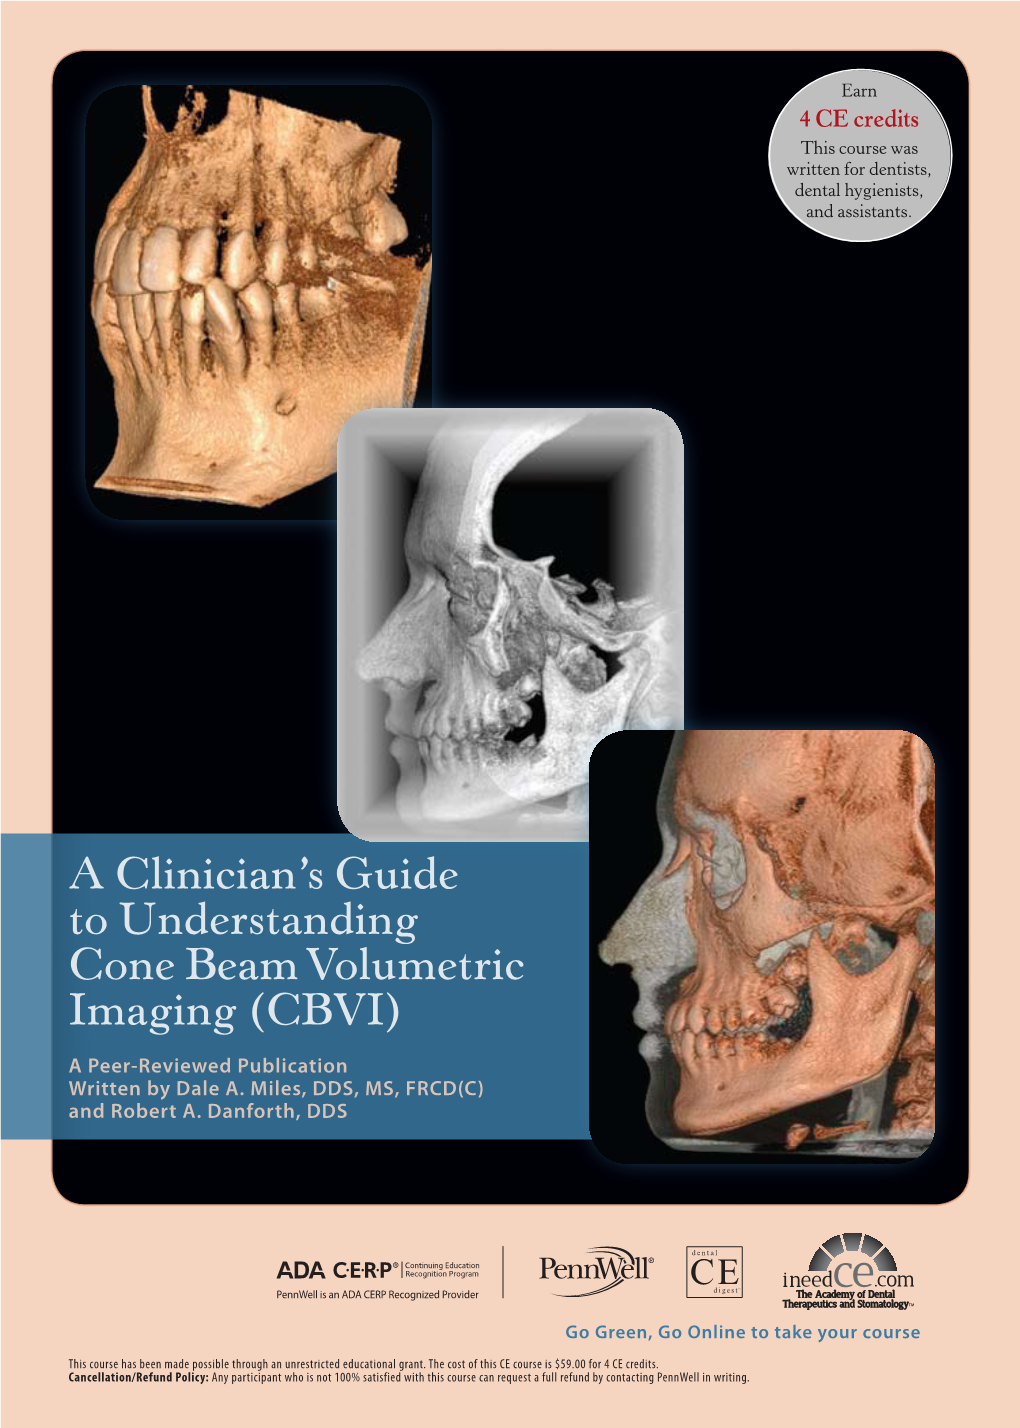 A Clinician's Guide to Understanding Cone Beam Volumetric Imaging